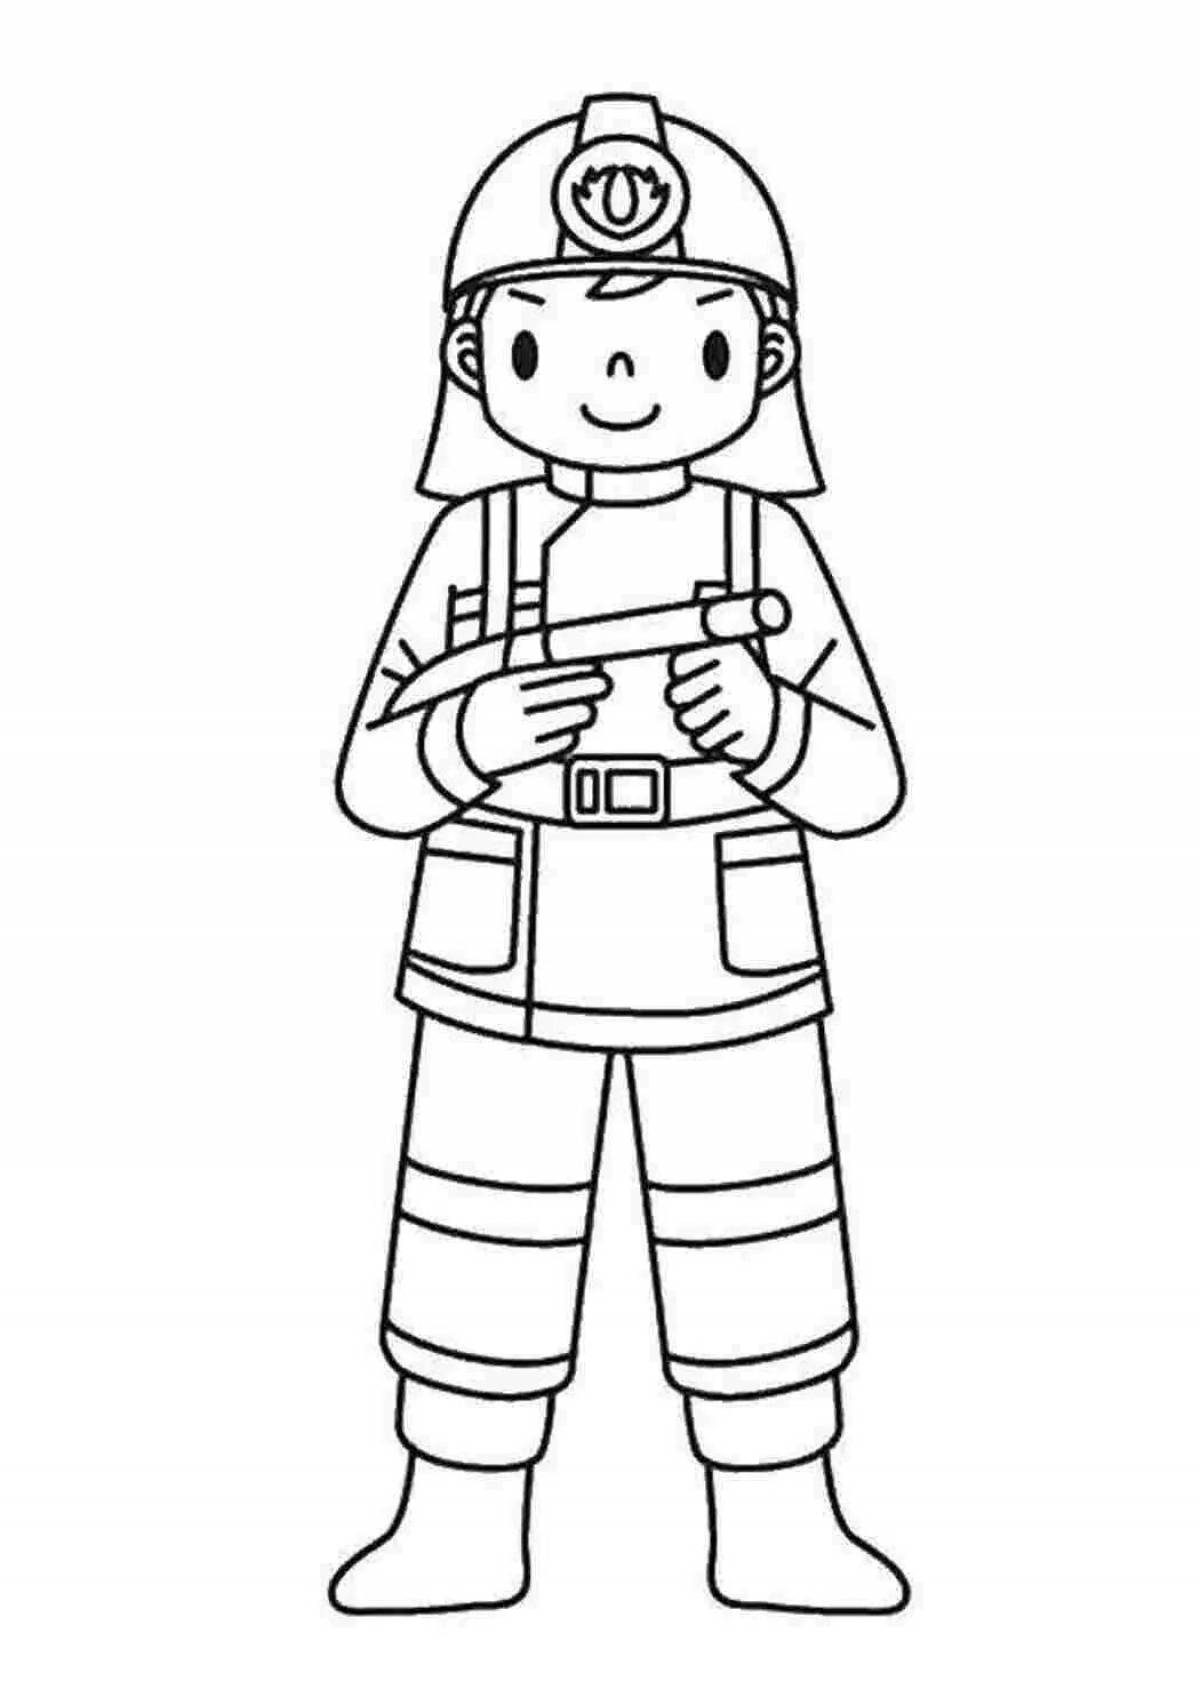 Great fireman coloring book for kids